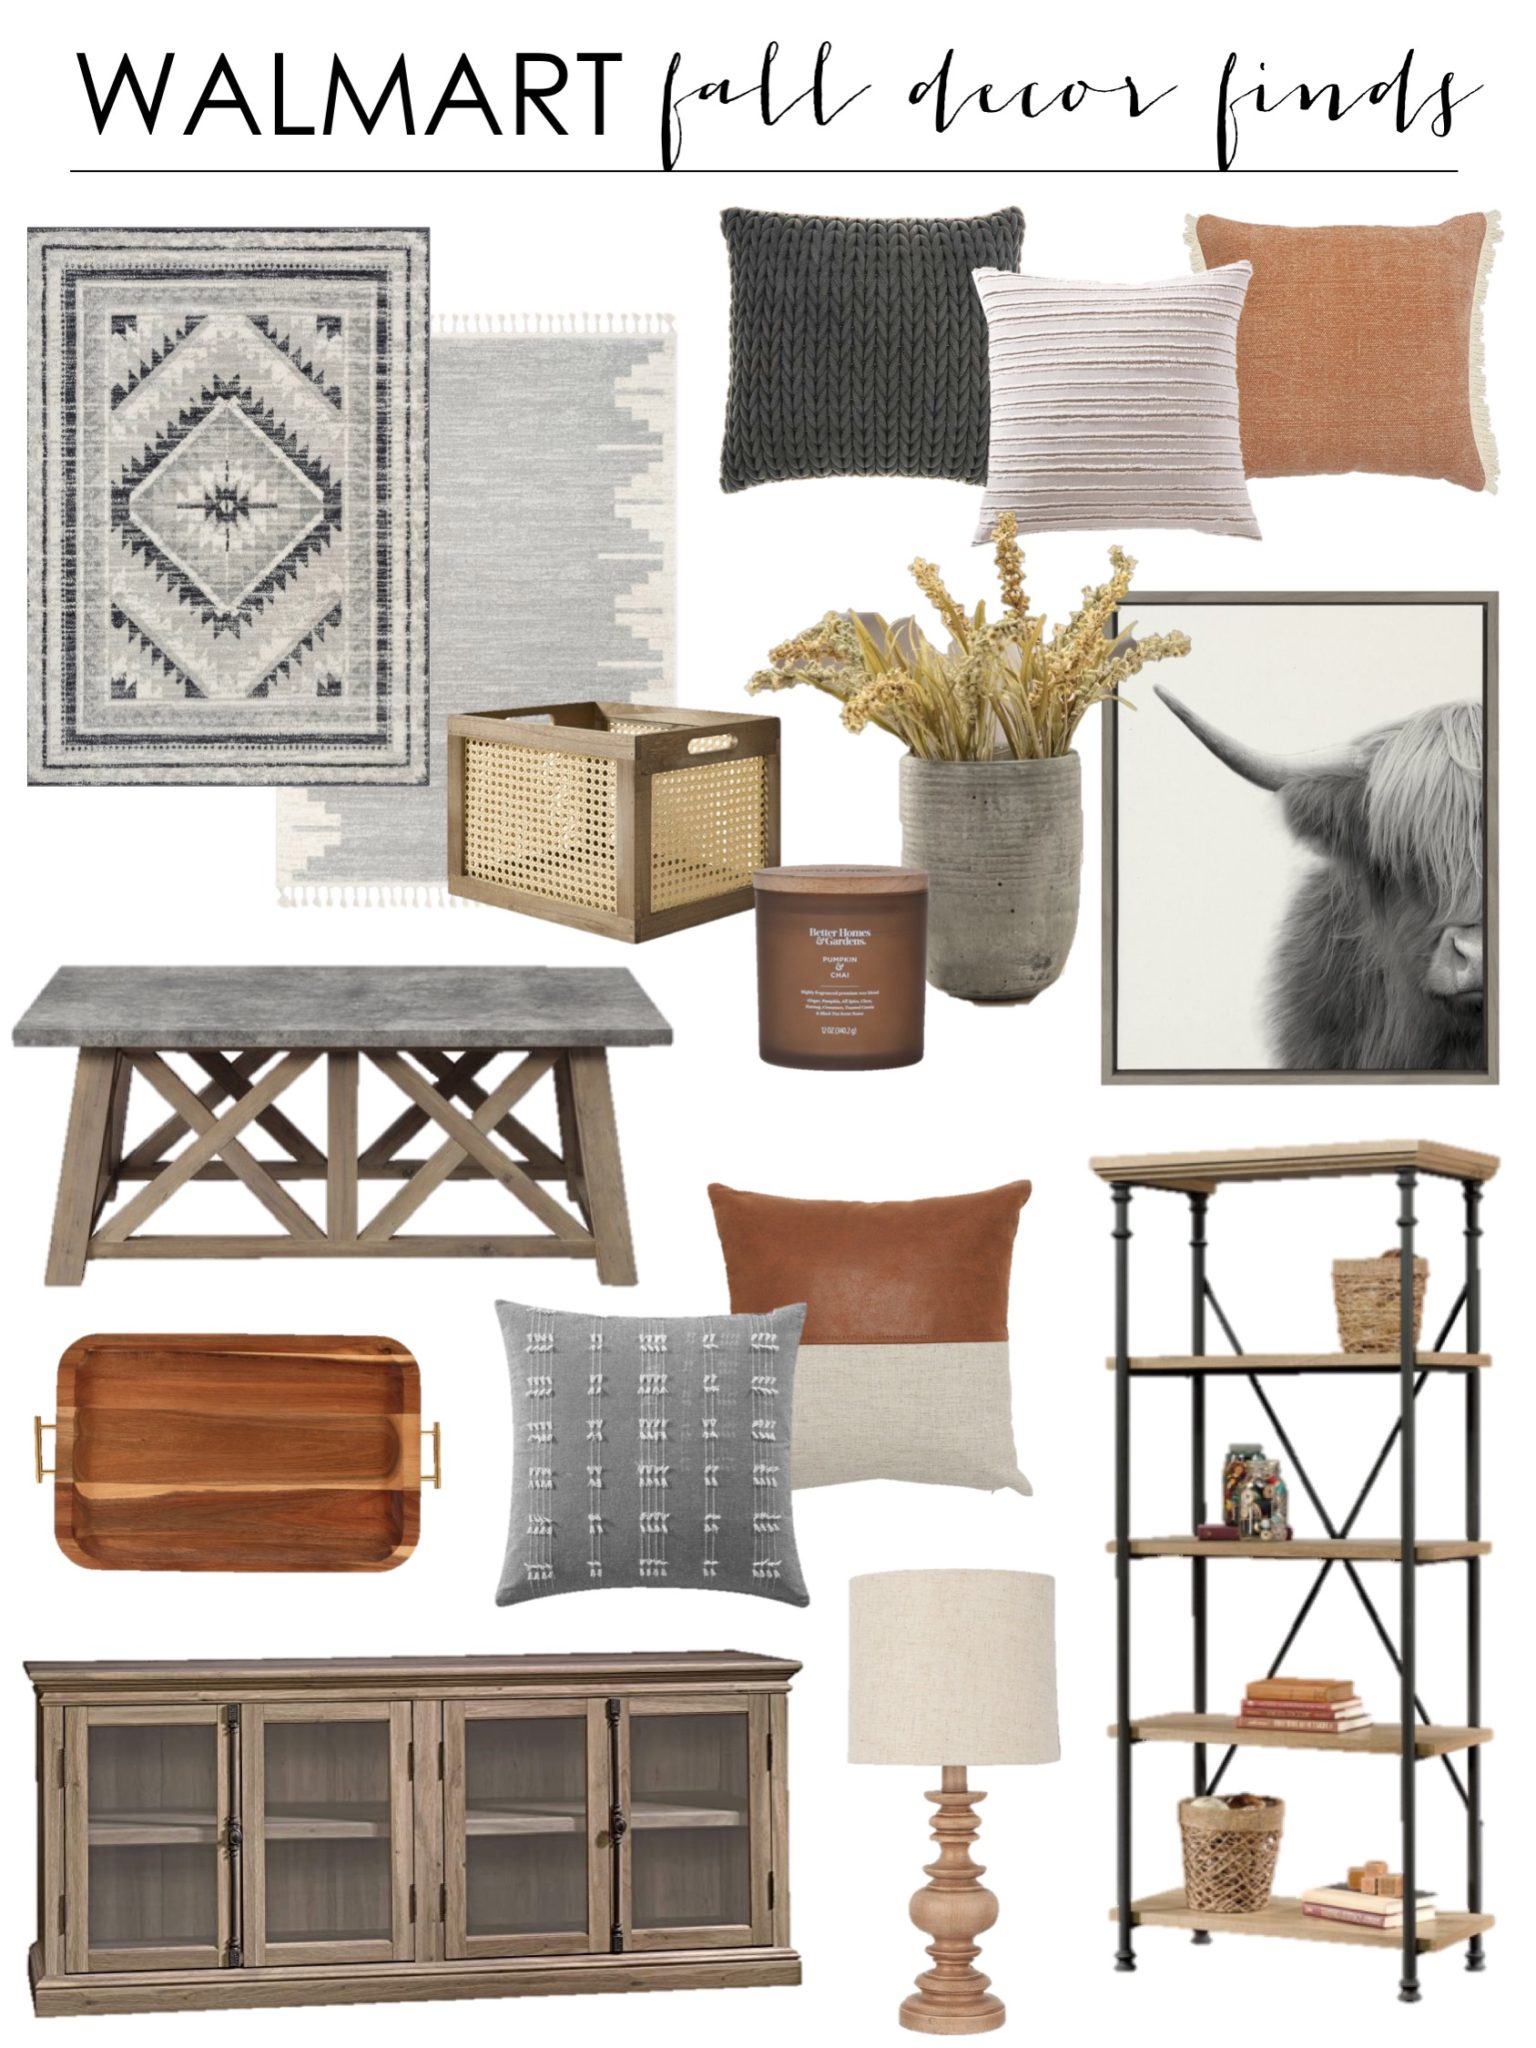 Fall Home Decor Finds with Walmart - House of Hargrove